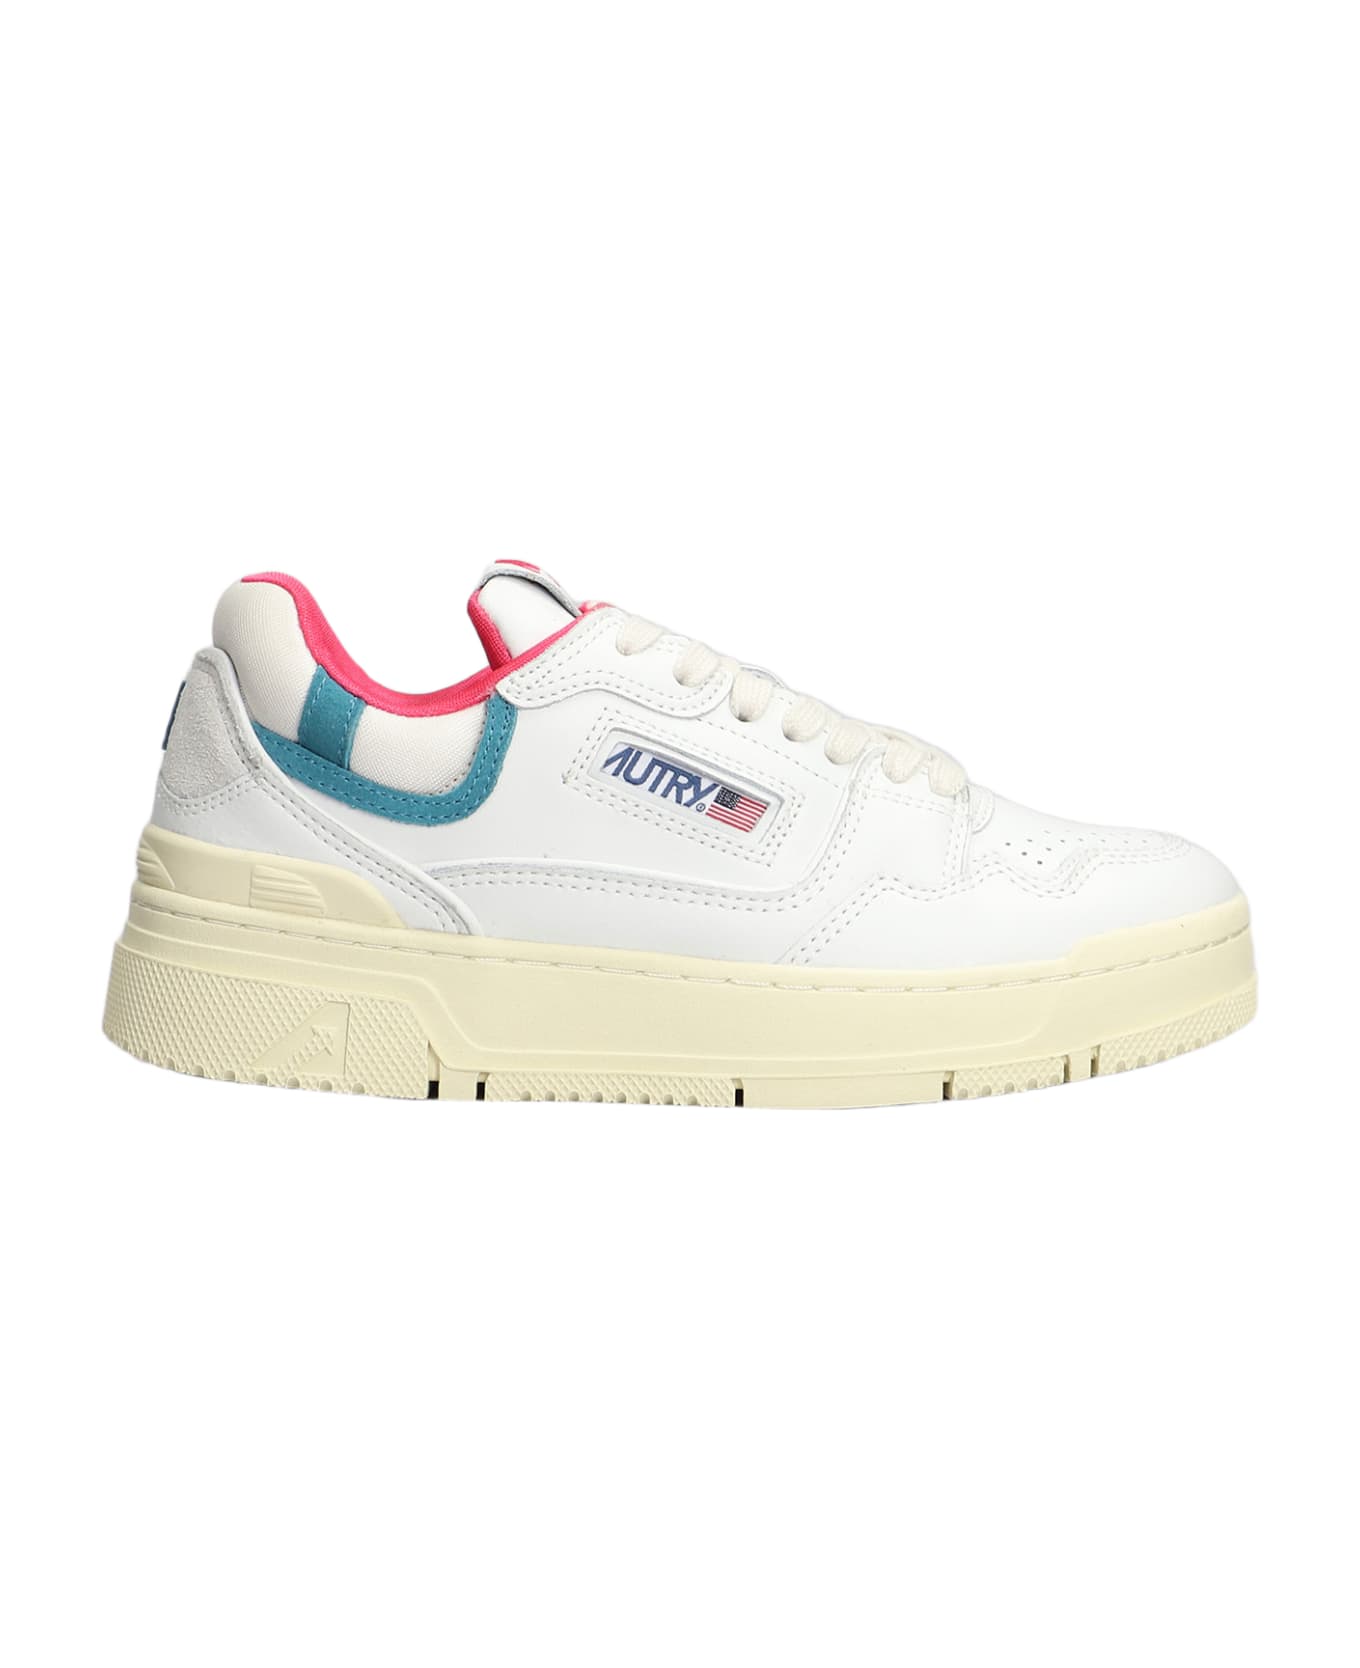 Autry Clc Low Sneakers In White Leather - white